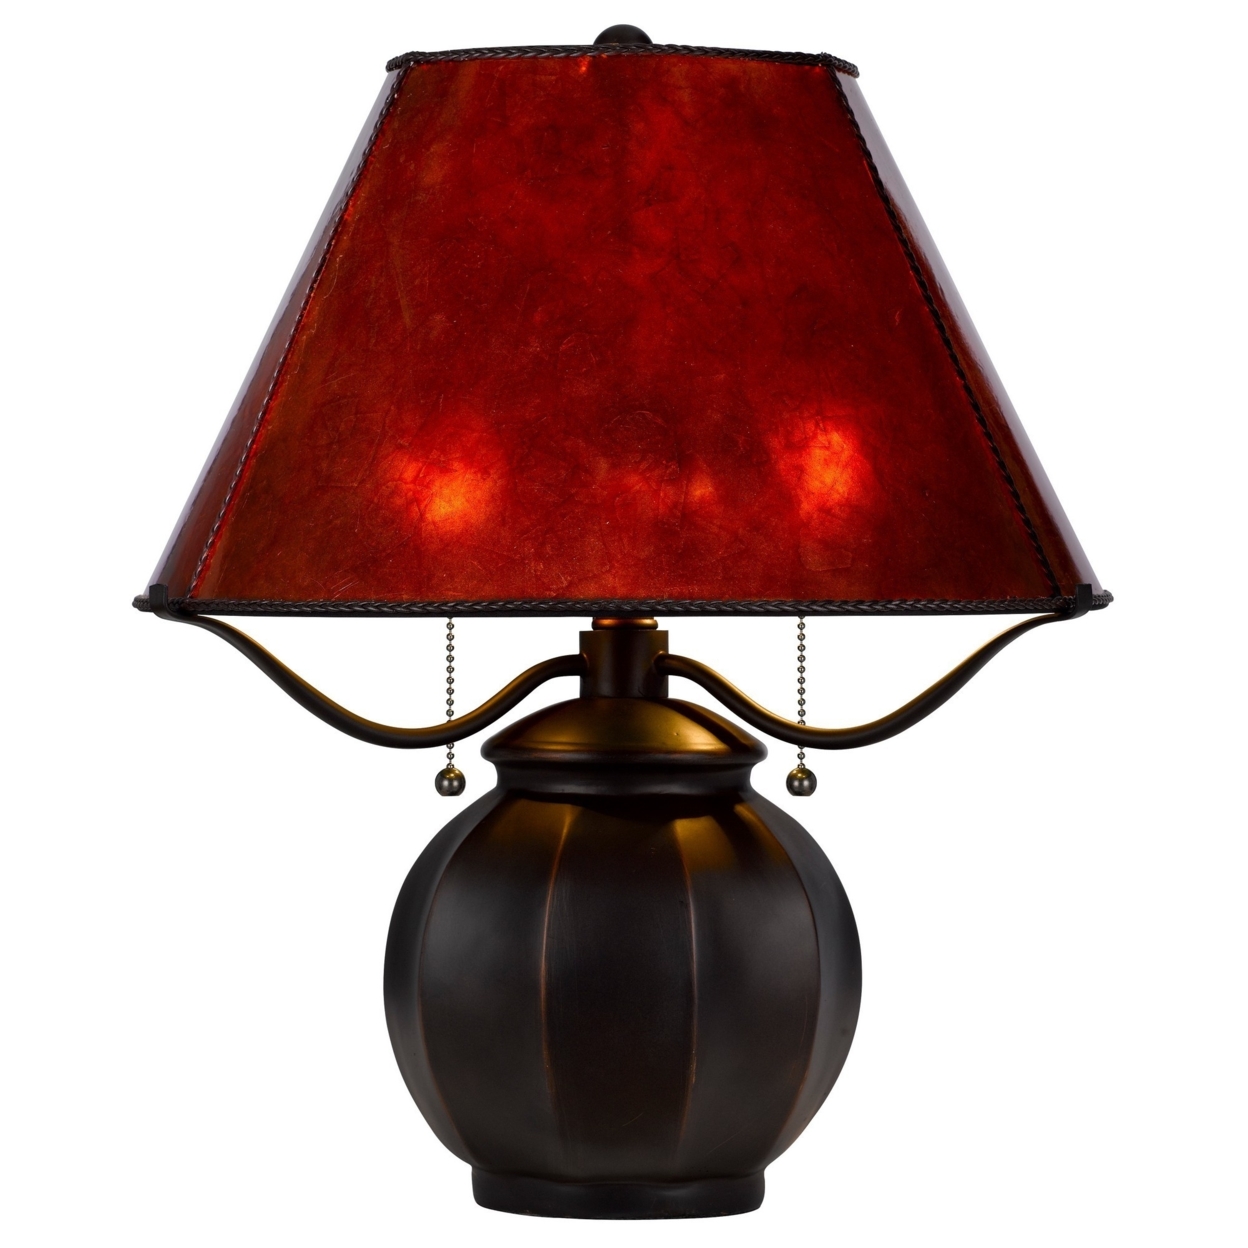 20 Inch Table Lamp, Vintage Red Amber Mica Shade, Upturned Arms, Round Body- Saltoro Sherpi